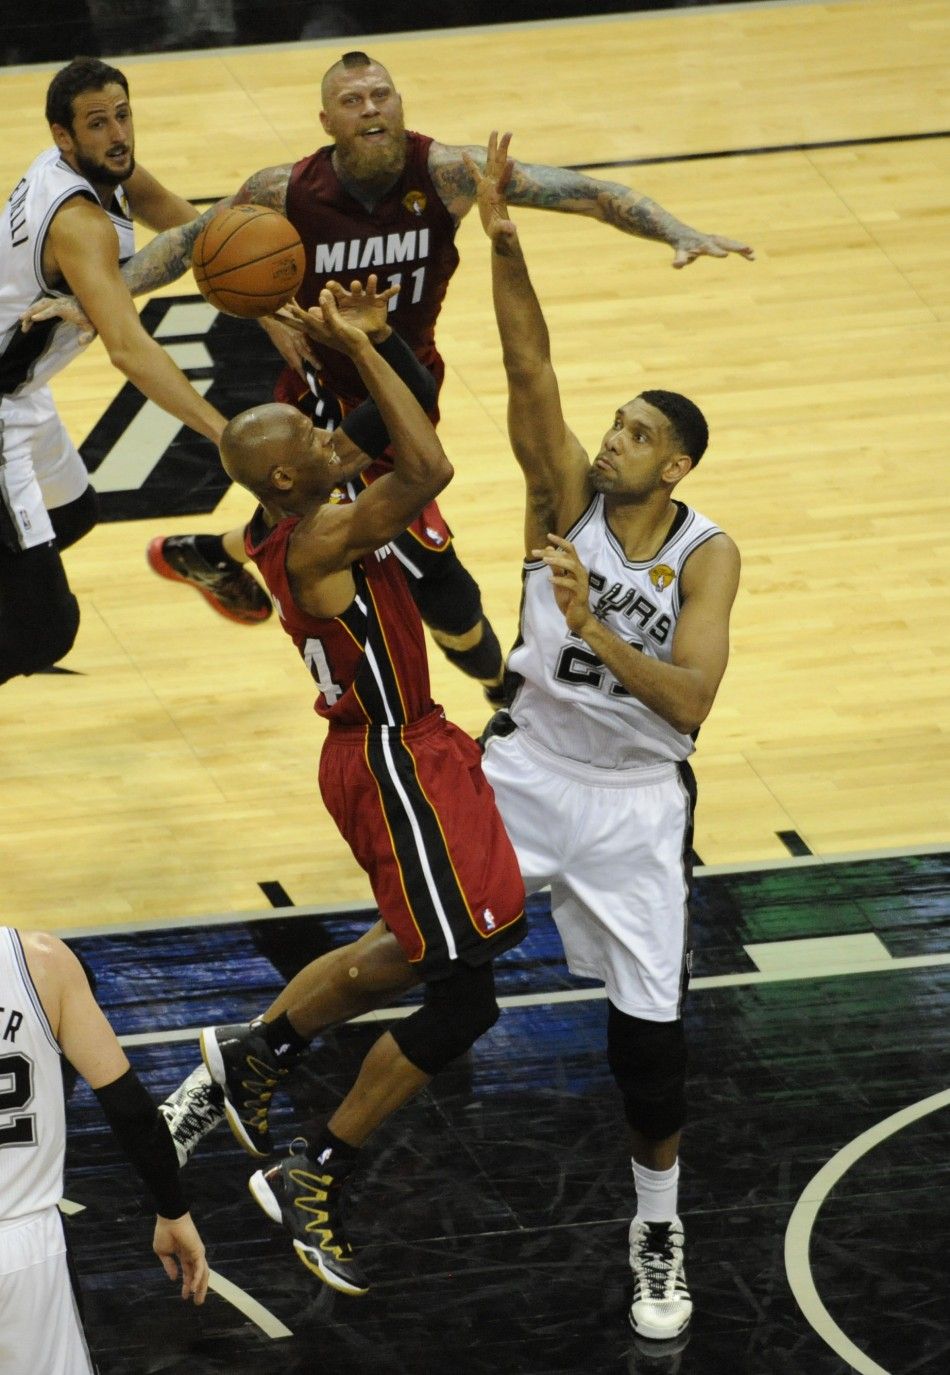 Jun 5, 2014 San Antonio, TX, USA San Antonio Spurs forward Tim Duncan 21 defends in the first half against Miami Heat guard Ray Allen 34 in game one of the 2014 NBA Finals at ATT Center.